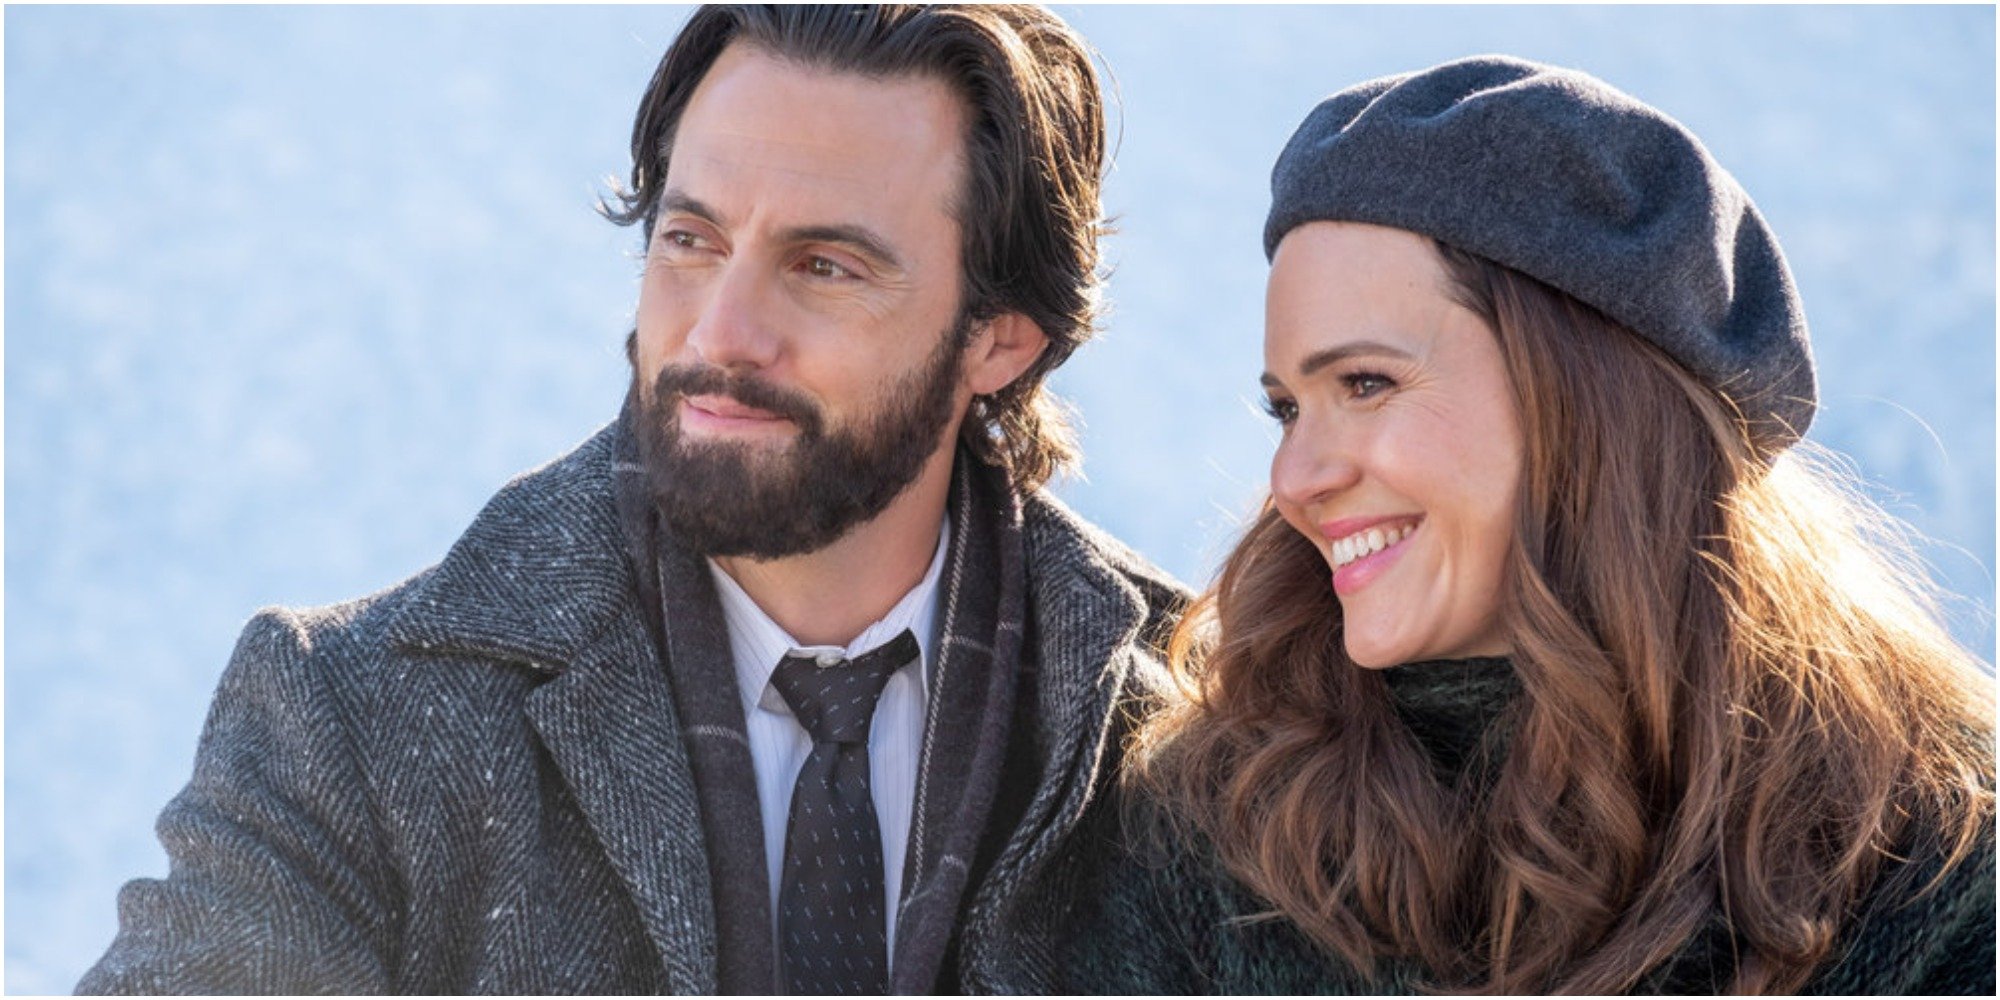 Milo Ventimiglia and Mandy Moore on the set of This Is Us